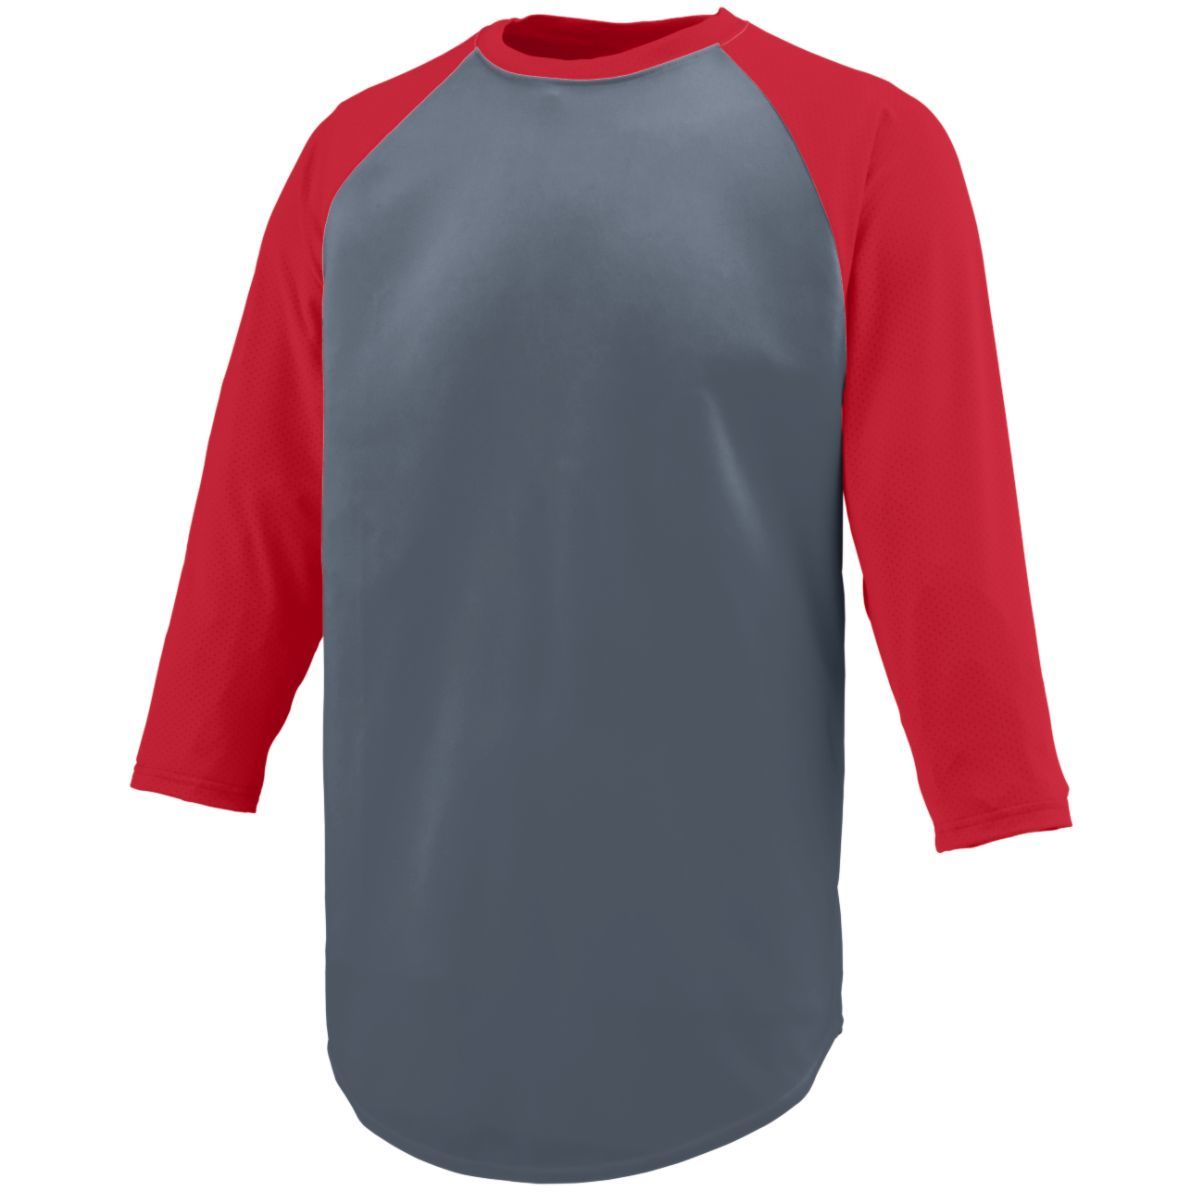 Augusta Sportswear Nova Jersey in Graphite/Red  -Part of the Adult, Adult-Jersey, Augusta-Products, Baseball, Shirts, All-Sports, All-Sports-1 product lines at KanaleyCreations.com